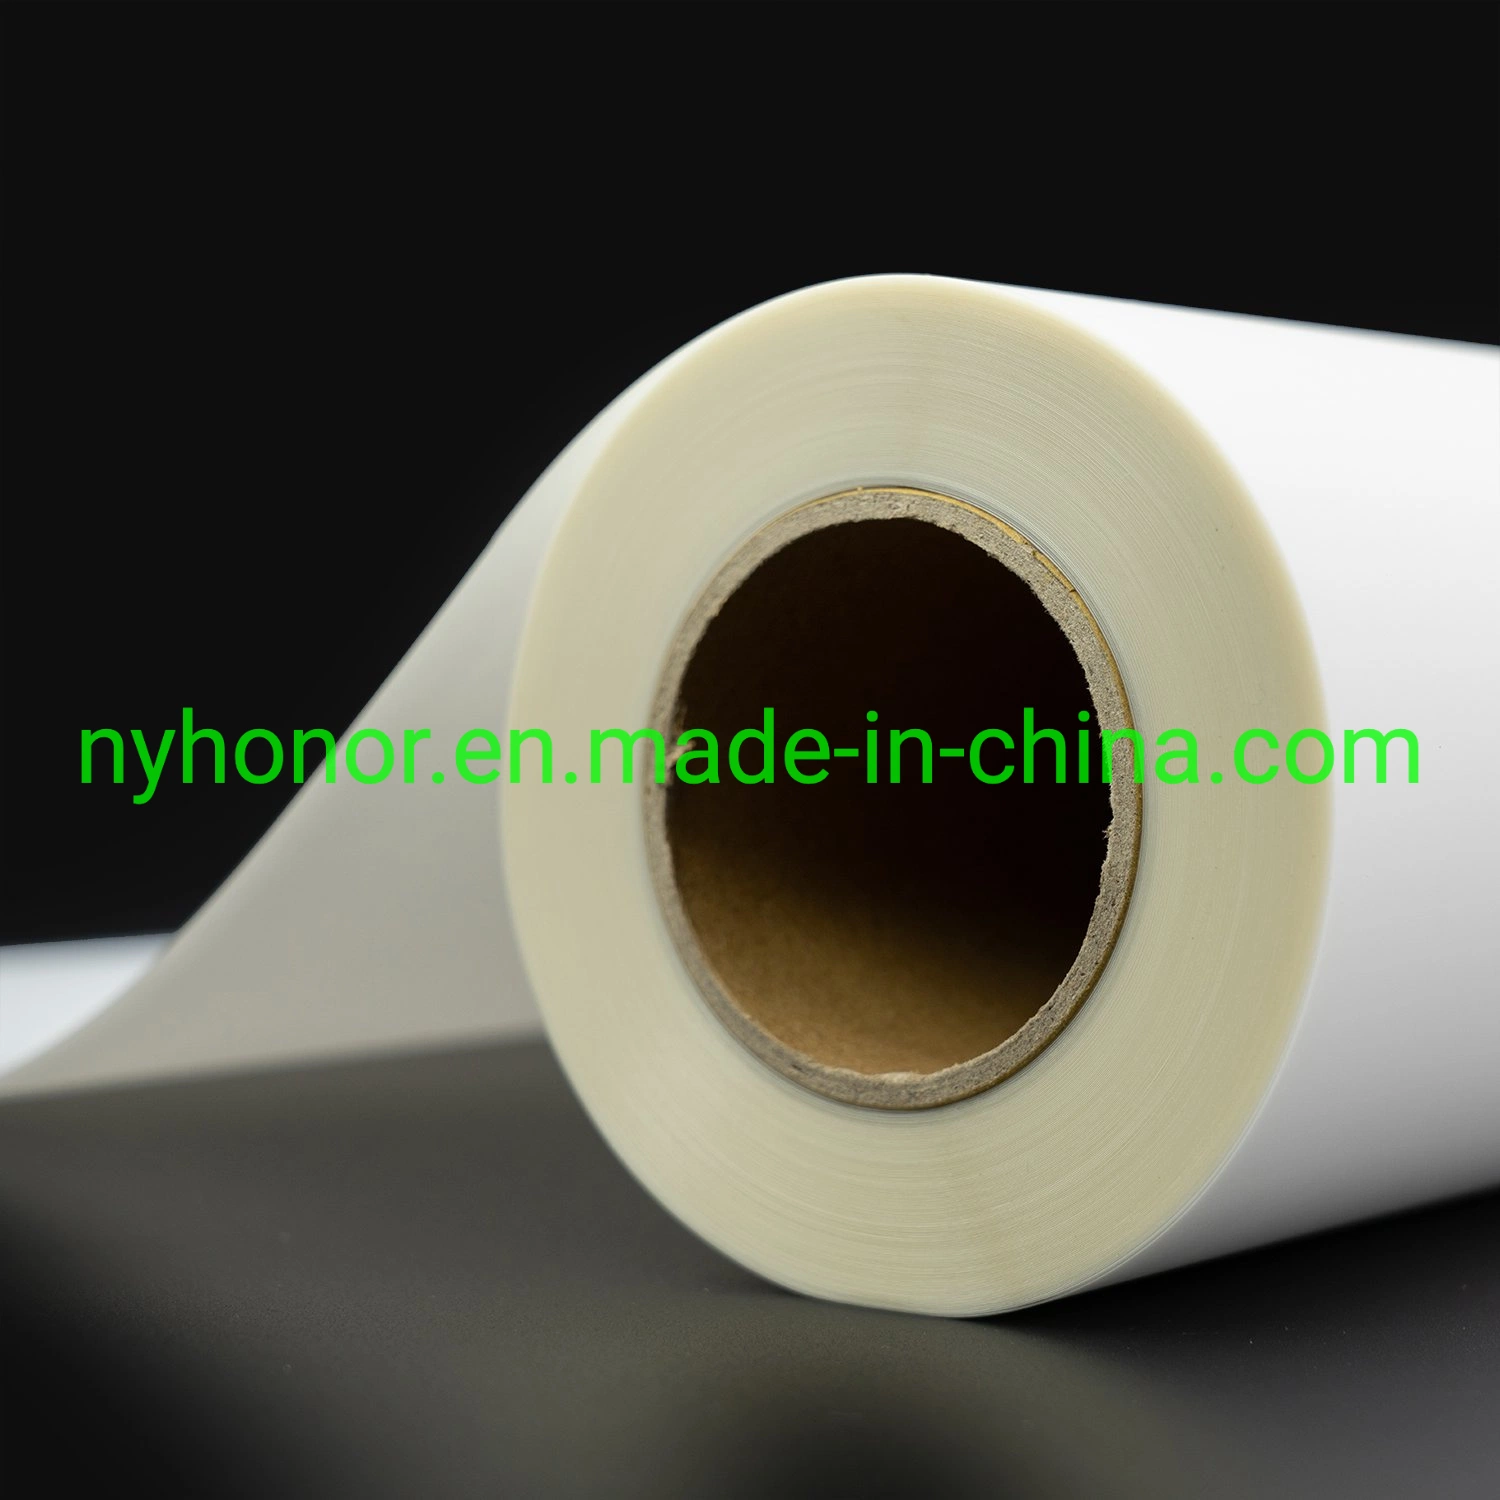 Solvent / Eco-Solvent PVC Film for Roll-up Display